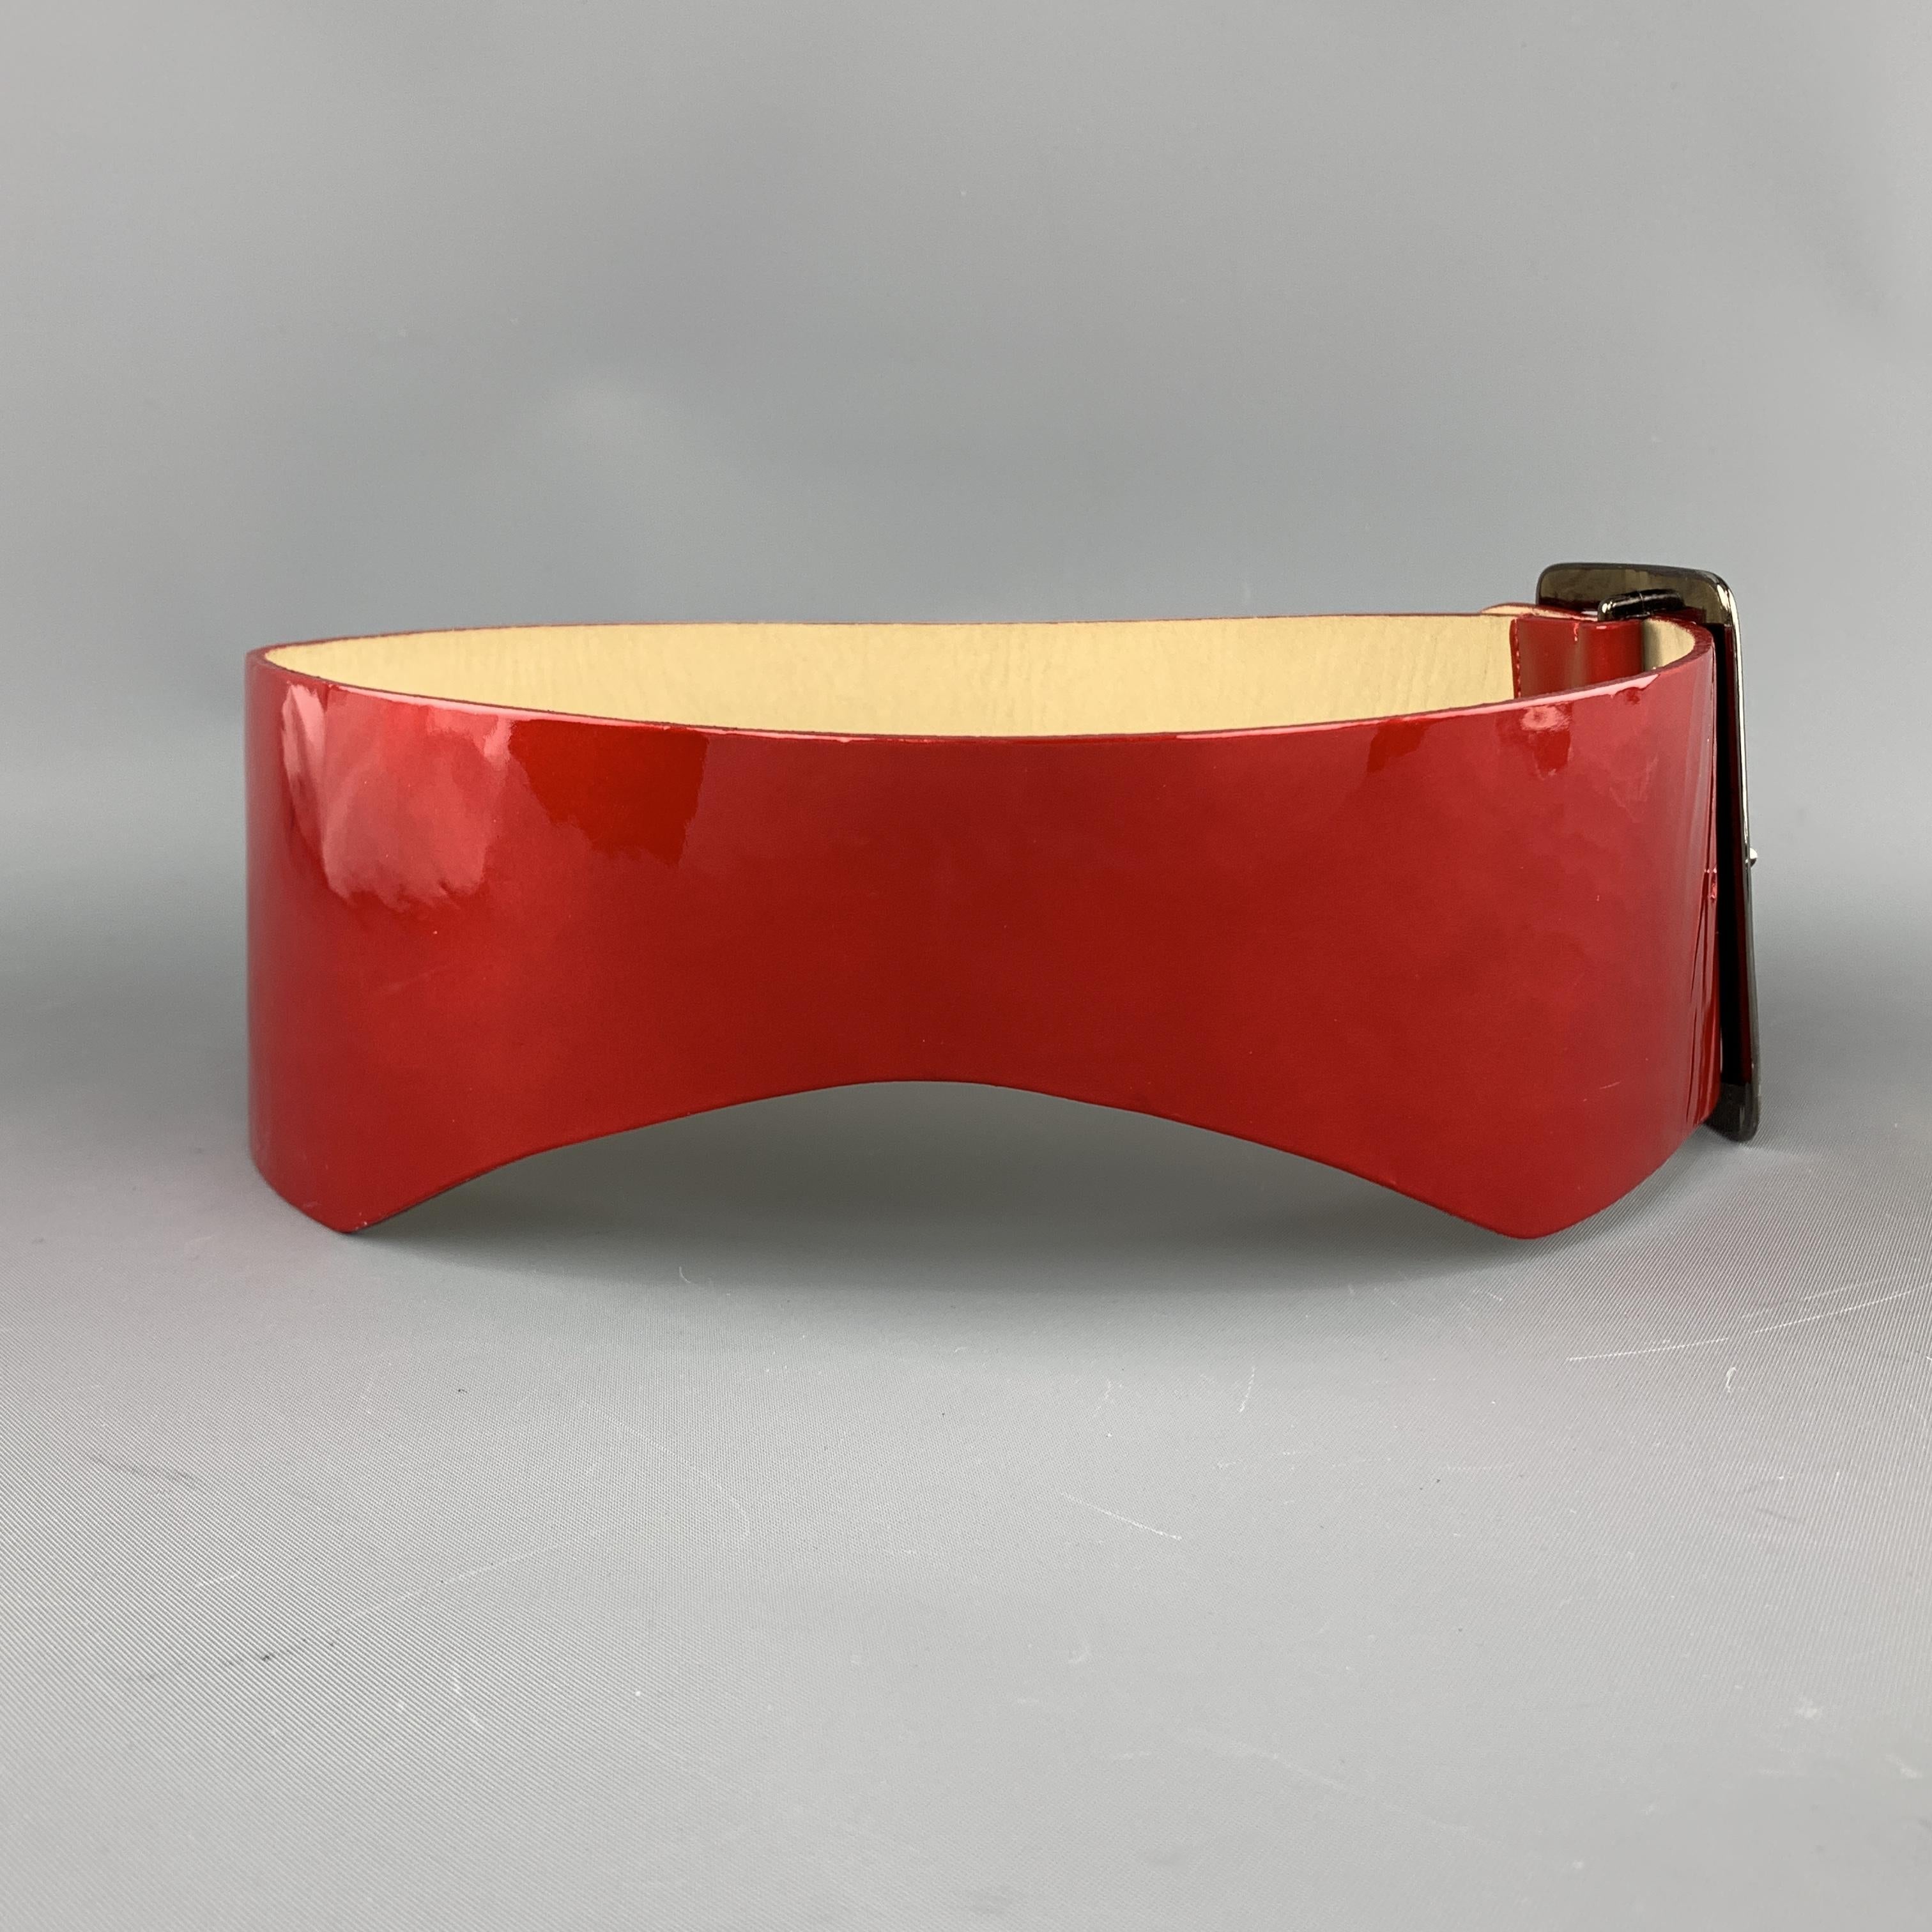 GIVENCHY waist belt features a thick red patent leather strap with side cutouts and dark silver tone metal oversized logo buckle. Made in France.

Very Good Pre-Owned Condition.
Marked: S

Length: 30 in.
Width: 3 in.
Fits: 26-28 in. 